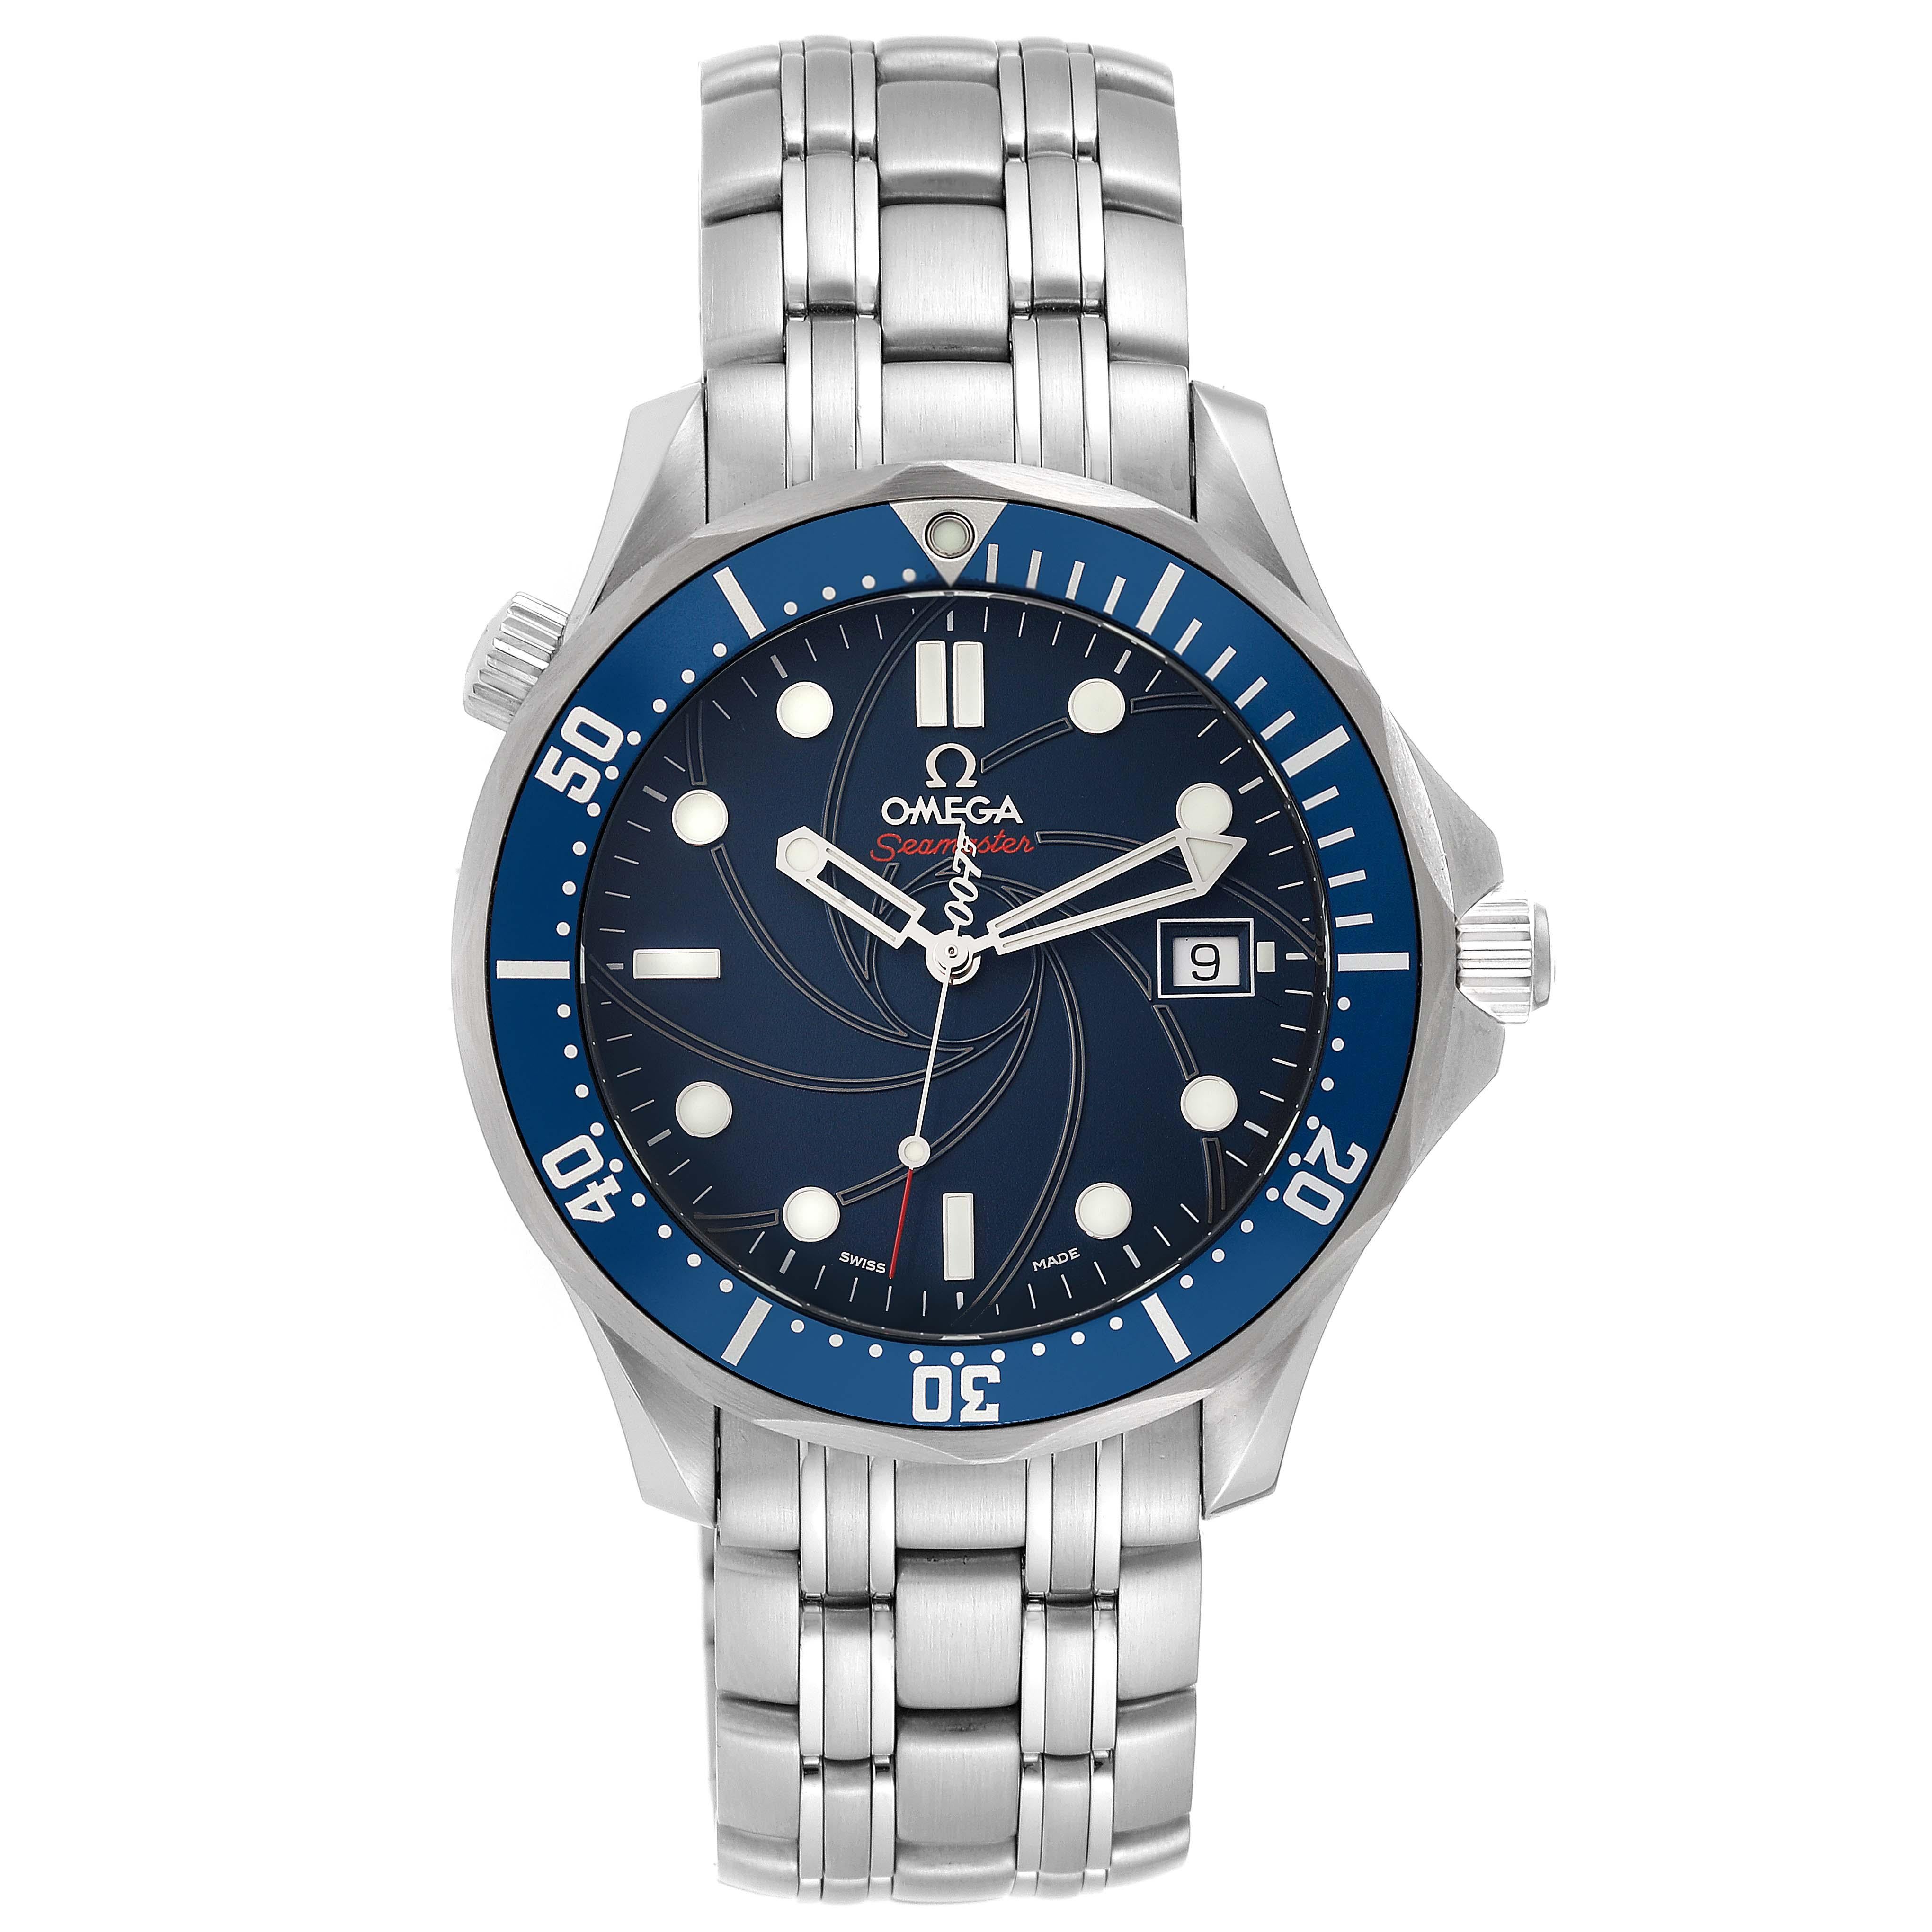 Omega Seamaster Bond 007 Limited Edition Steel Mens Watch 2226.80.00 Box Card. Automatic self-winding movement. Stainless steel case 41.0 mm in diameter. Omega logo on the crown. Unidirectional rotating bezel. Scratch resistant sapphire crystal.